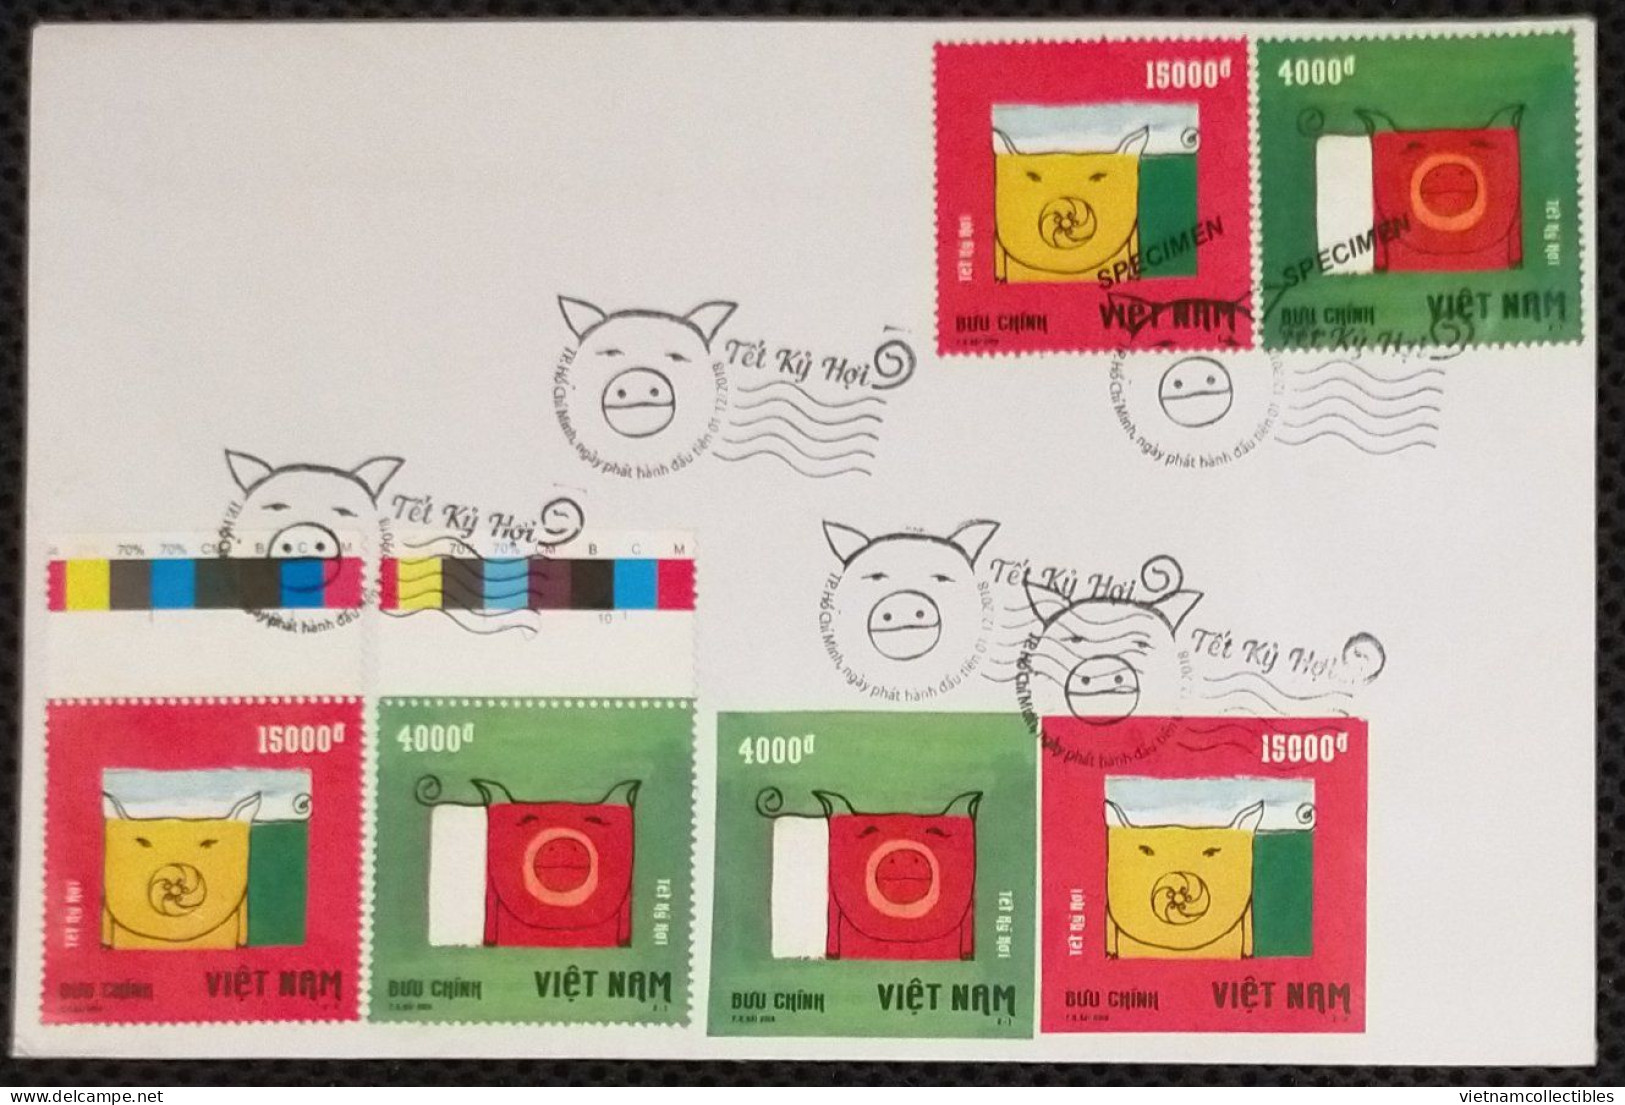 FDC Vietnam Viet Nam Cover With Perf, Imperf & Specimen Stamps 2018 : NEW YEAR OF PIG ZODIAC 2019 (Ms1101) - Vietnam